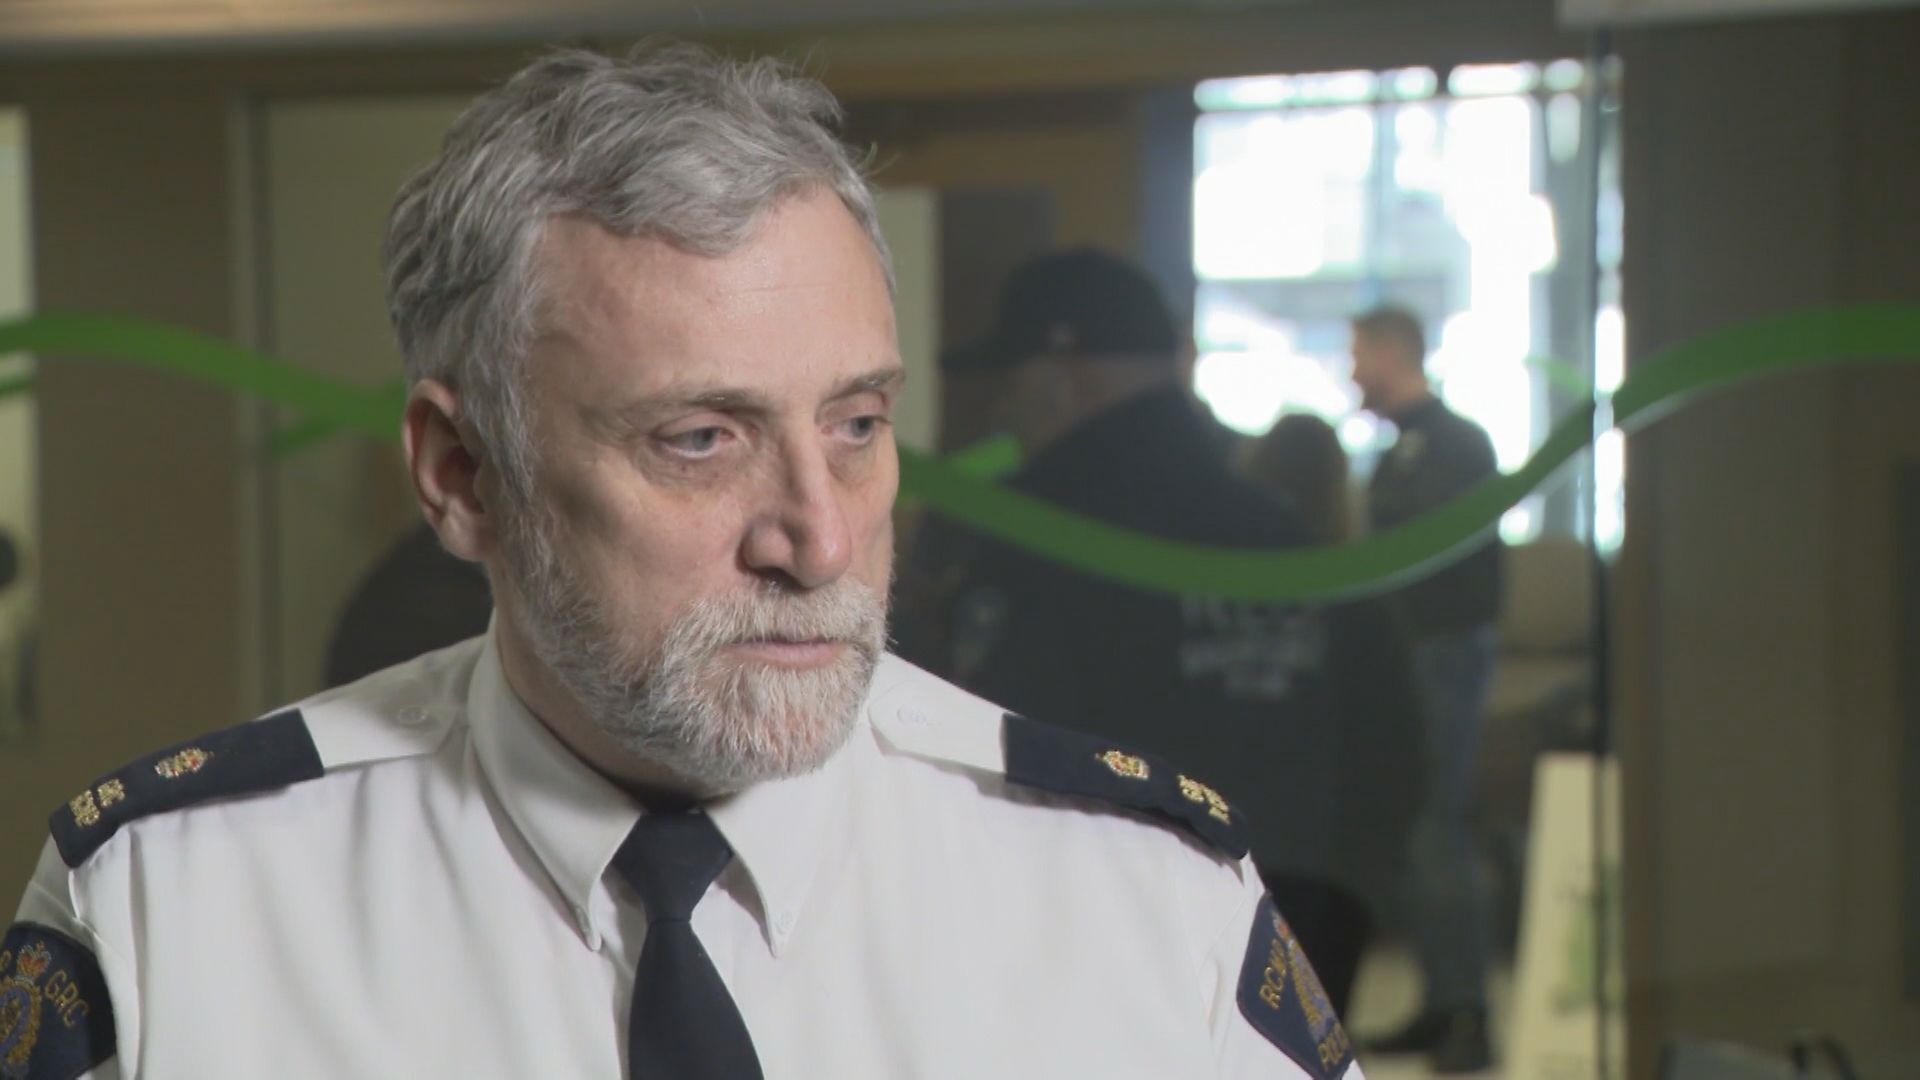 Coquitlam RCMP holds safety outreach event in wake of shootings